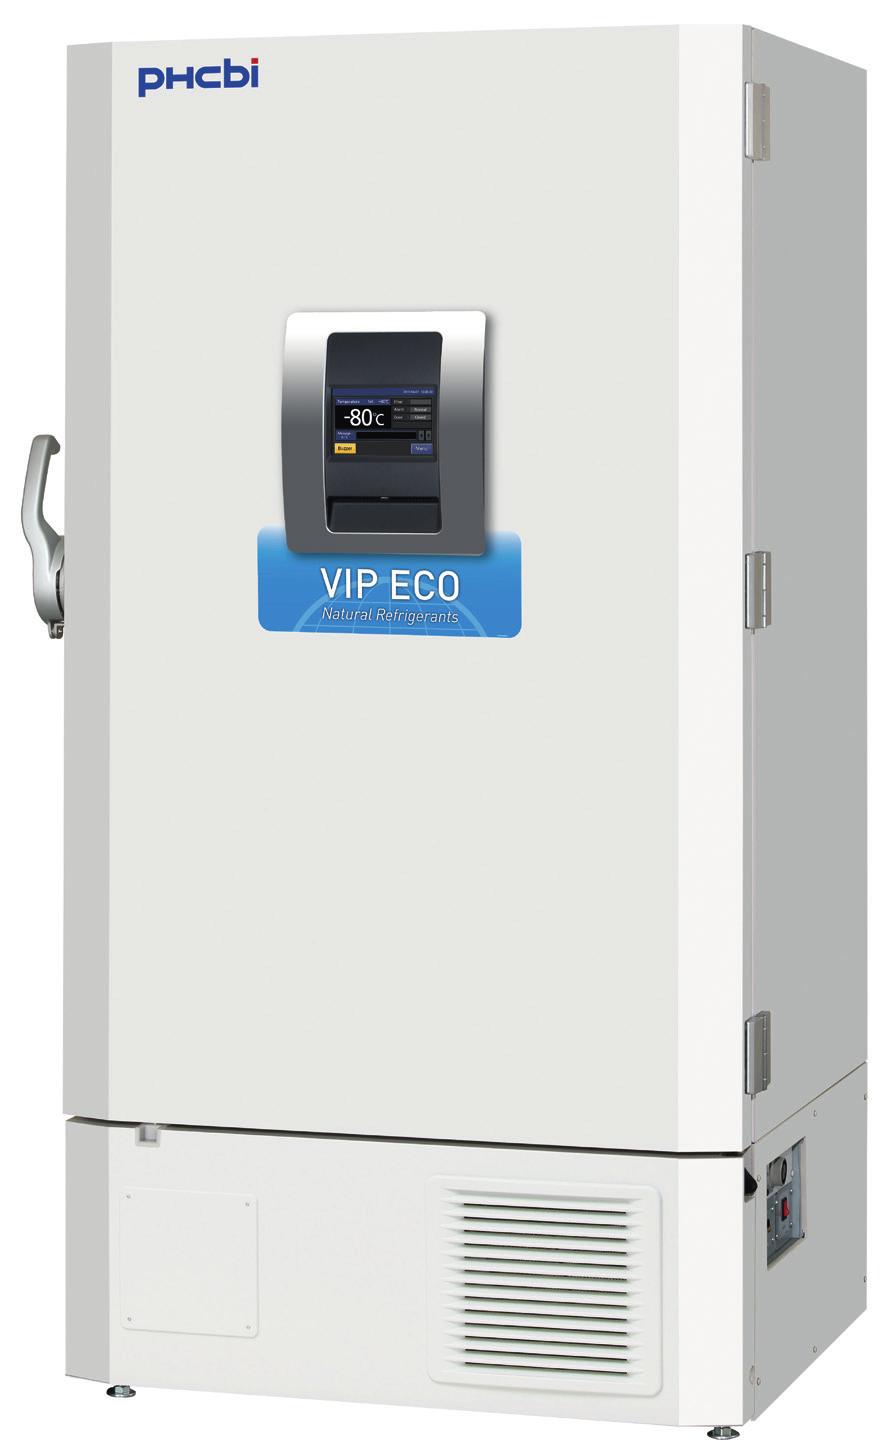 Models: MDFDU52VHPE MDFDU72VHPE VIP ECO ULT Freezers VIP ECO Ultra Low Temperature Freezers with natural refrigerants minimise energy consumption, reduce environmental impact and save money.